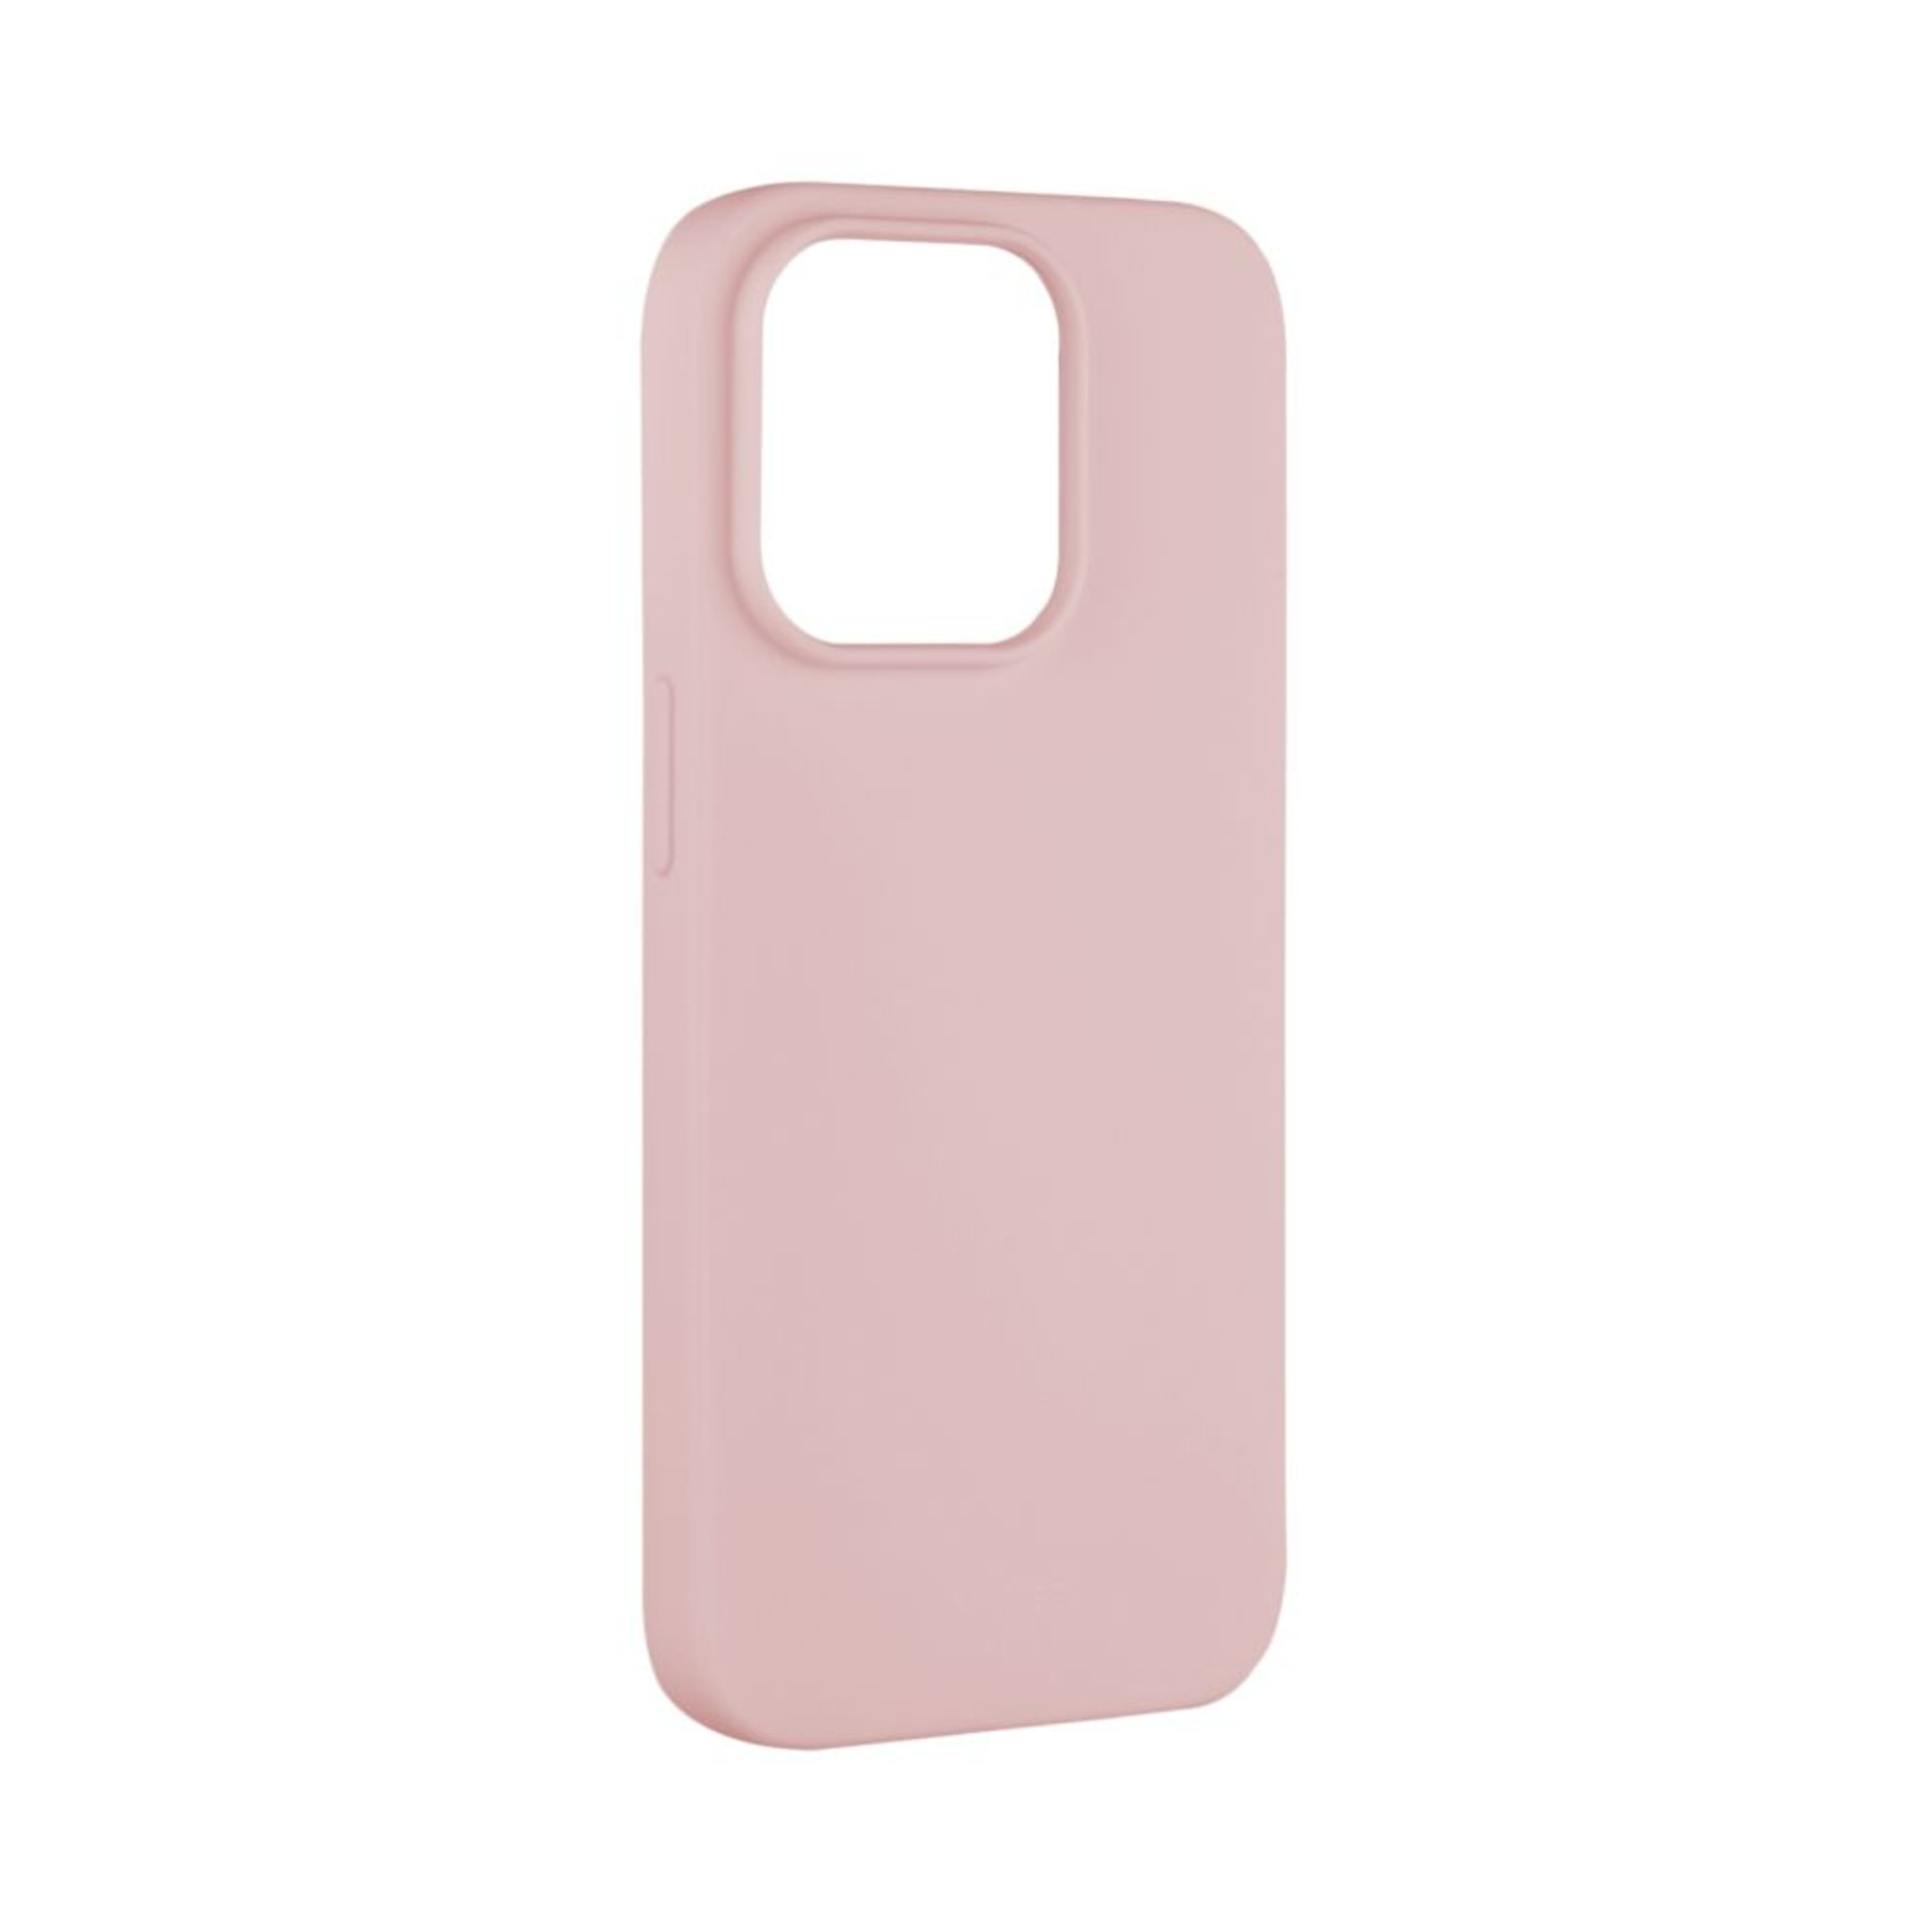 FIXED FIXST-931-PK, Backcover, Rosa 14 Max, iPhone Pro Apple